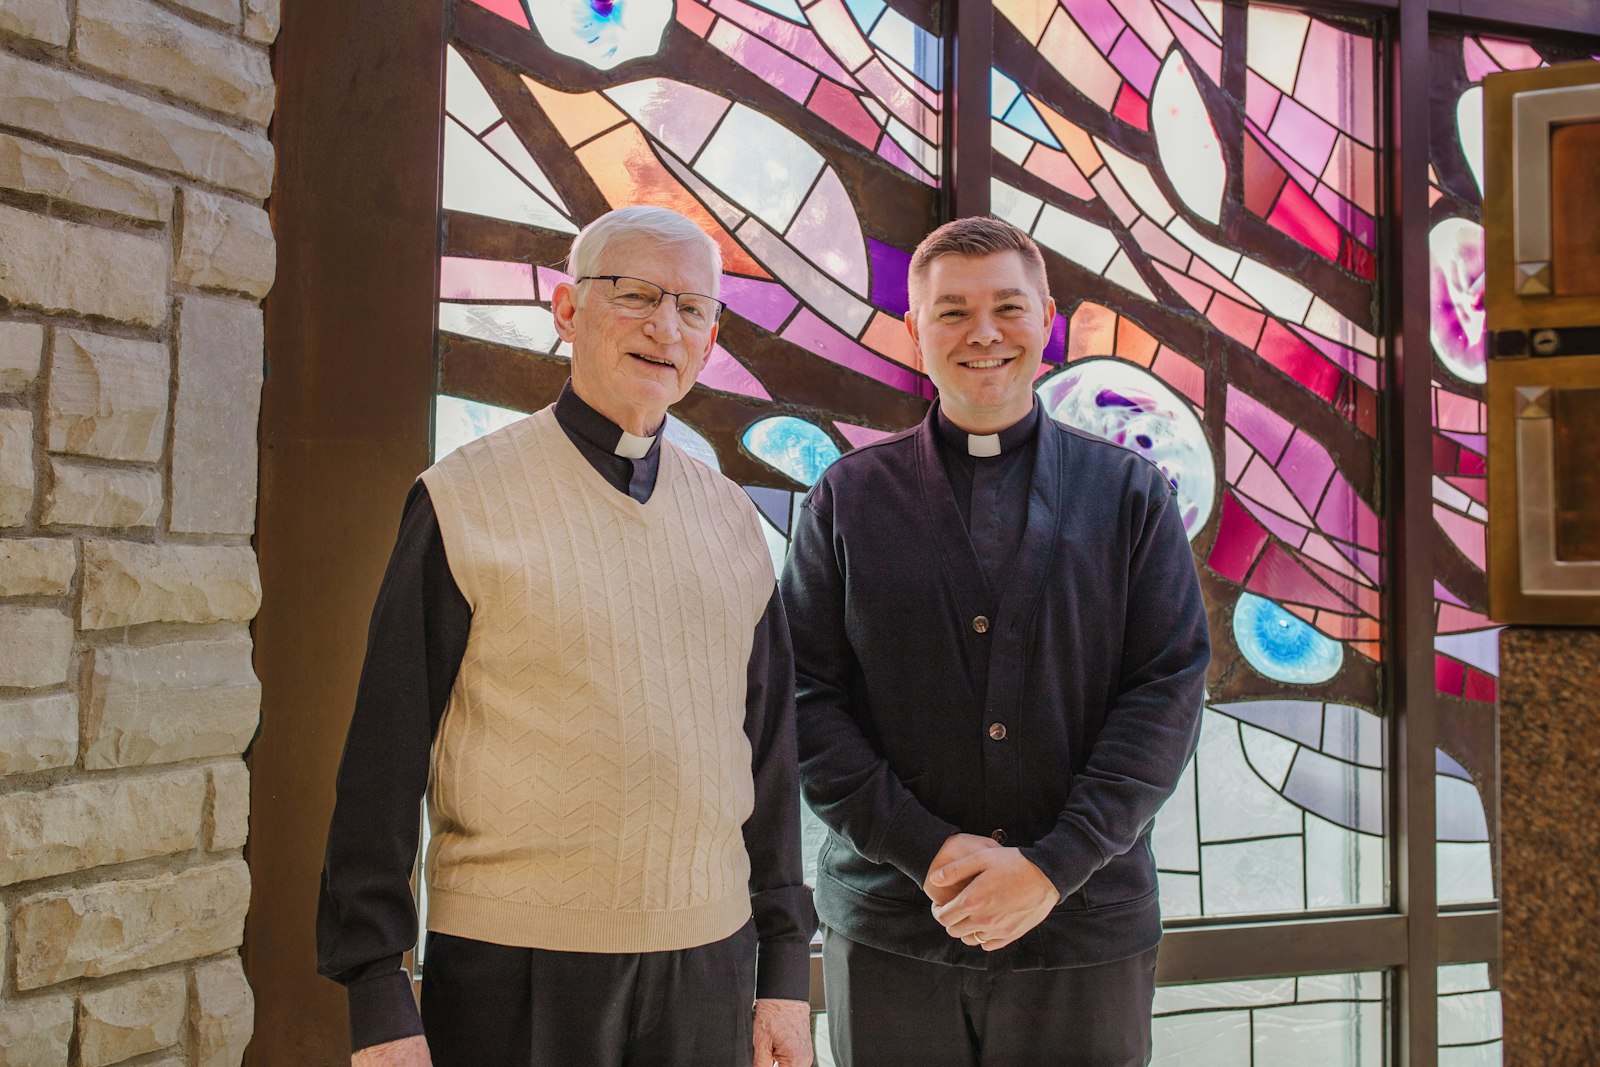 Msgr. Gerald McEnhill, left, established the Msgr. Gerald A. McEnhill Business Education Fund for Priests, which he hopes will help priests like Fr. Adam Nowak, right, and others learn and apply the skills he found valuable over his five-decade ministry. As a young priest, Msgr. McEnhill pursued a master's degree in business at his own expense, learning tools he found useful time and again as a parish leader.